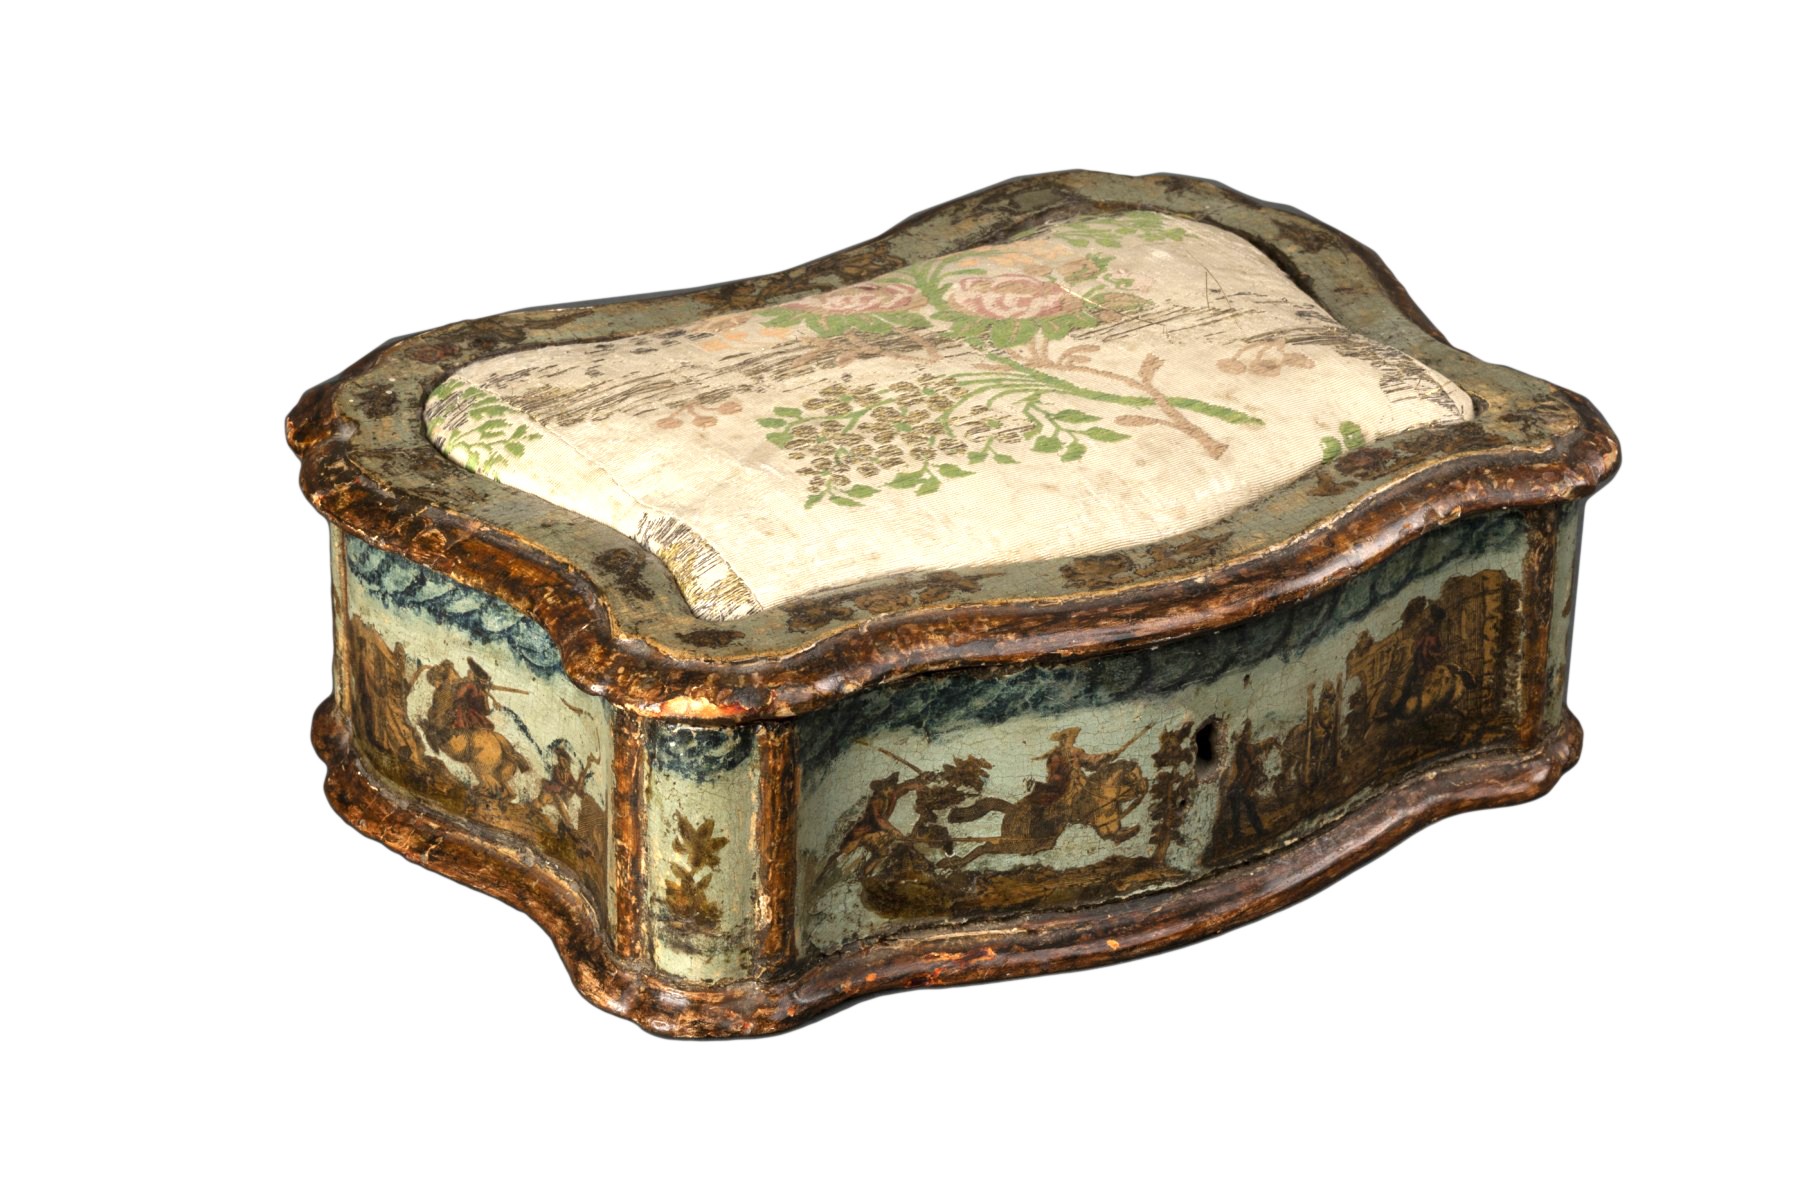 Sewing box made of wood and arte povera - Veneto Early 18th century ...